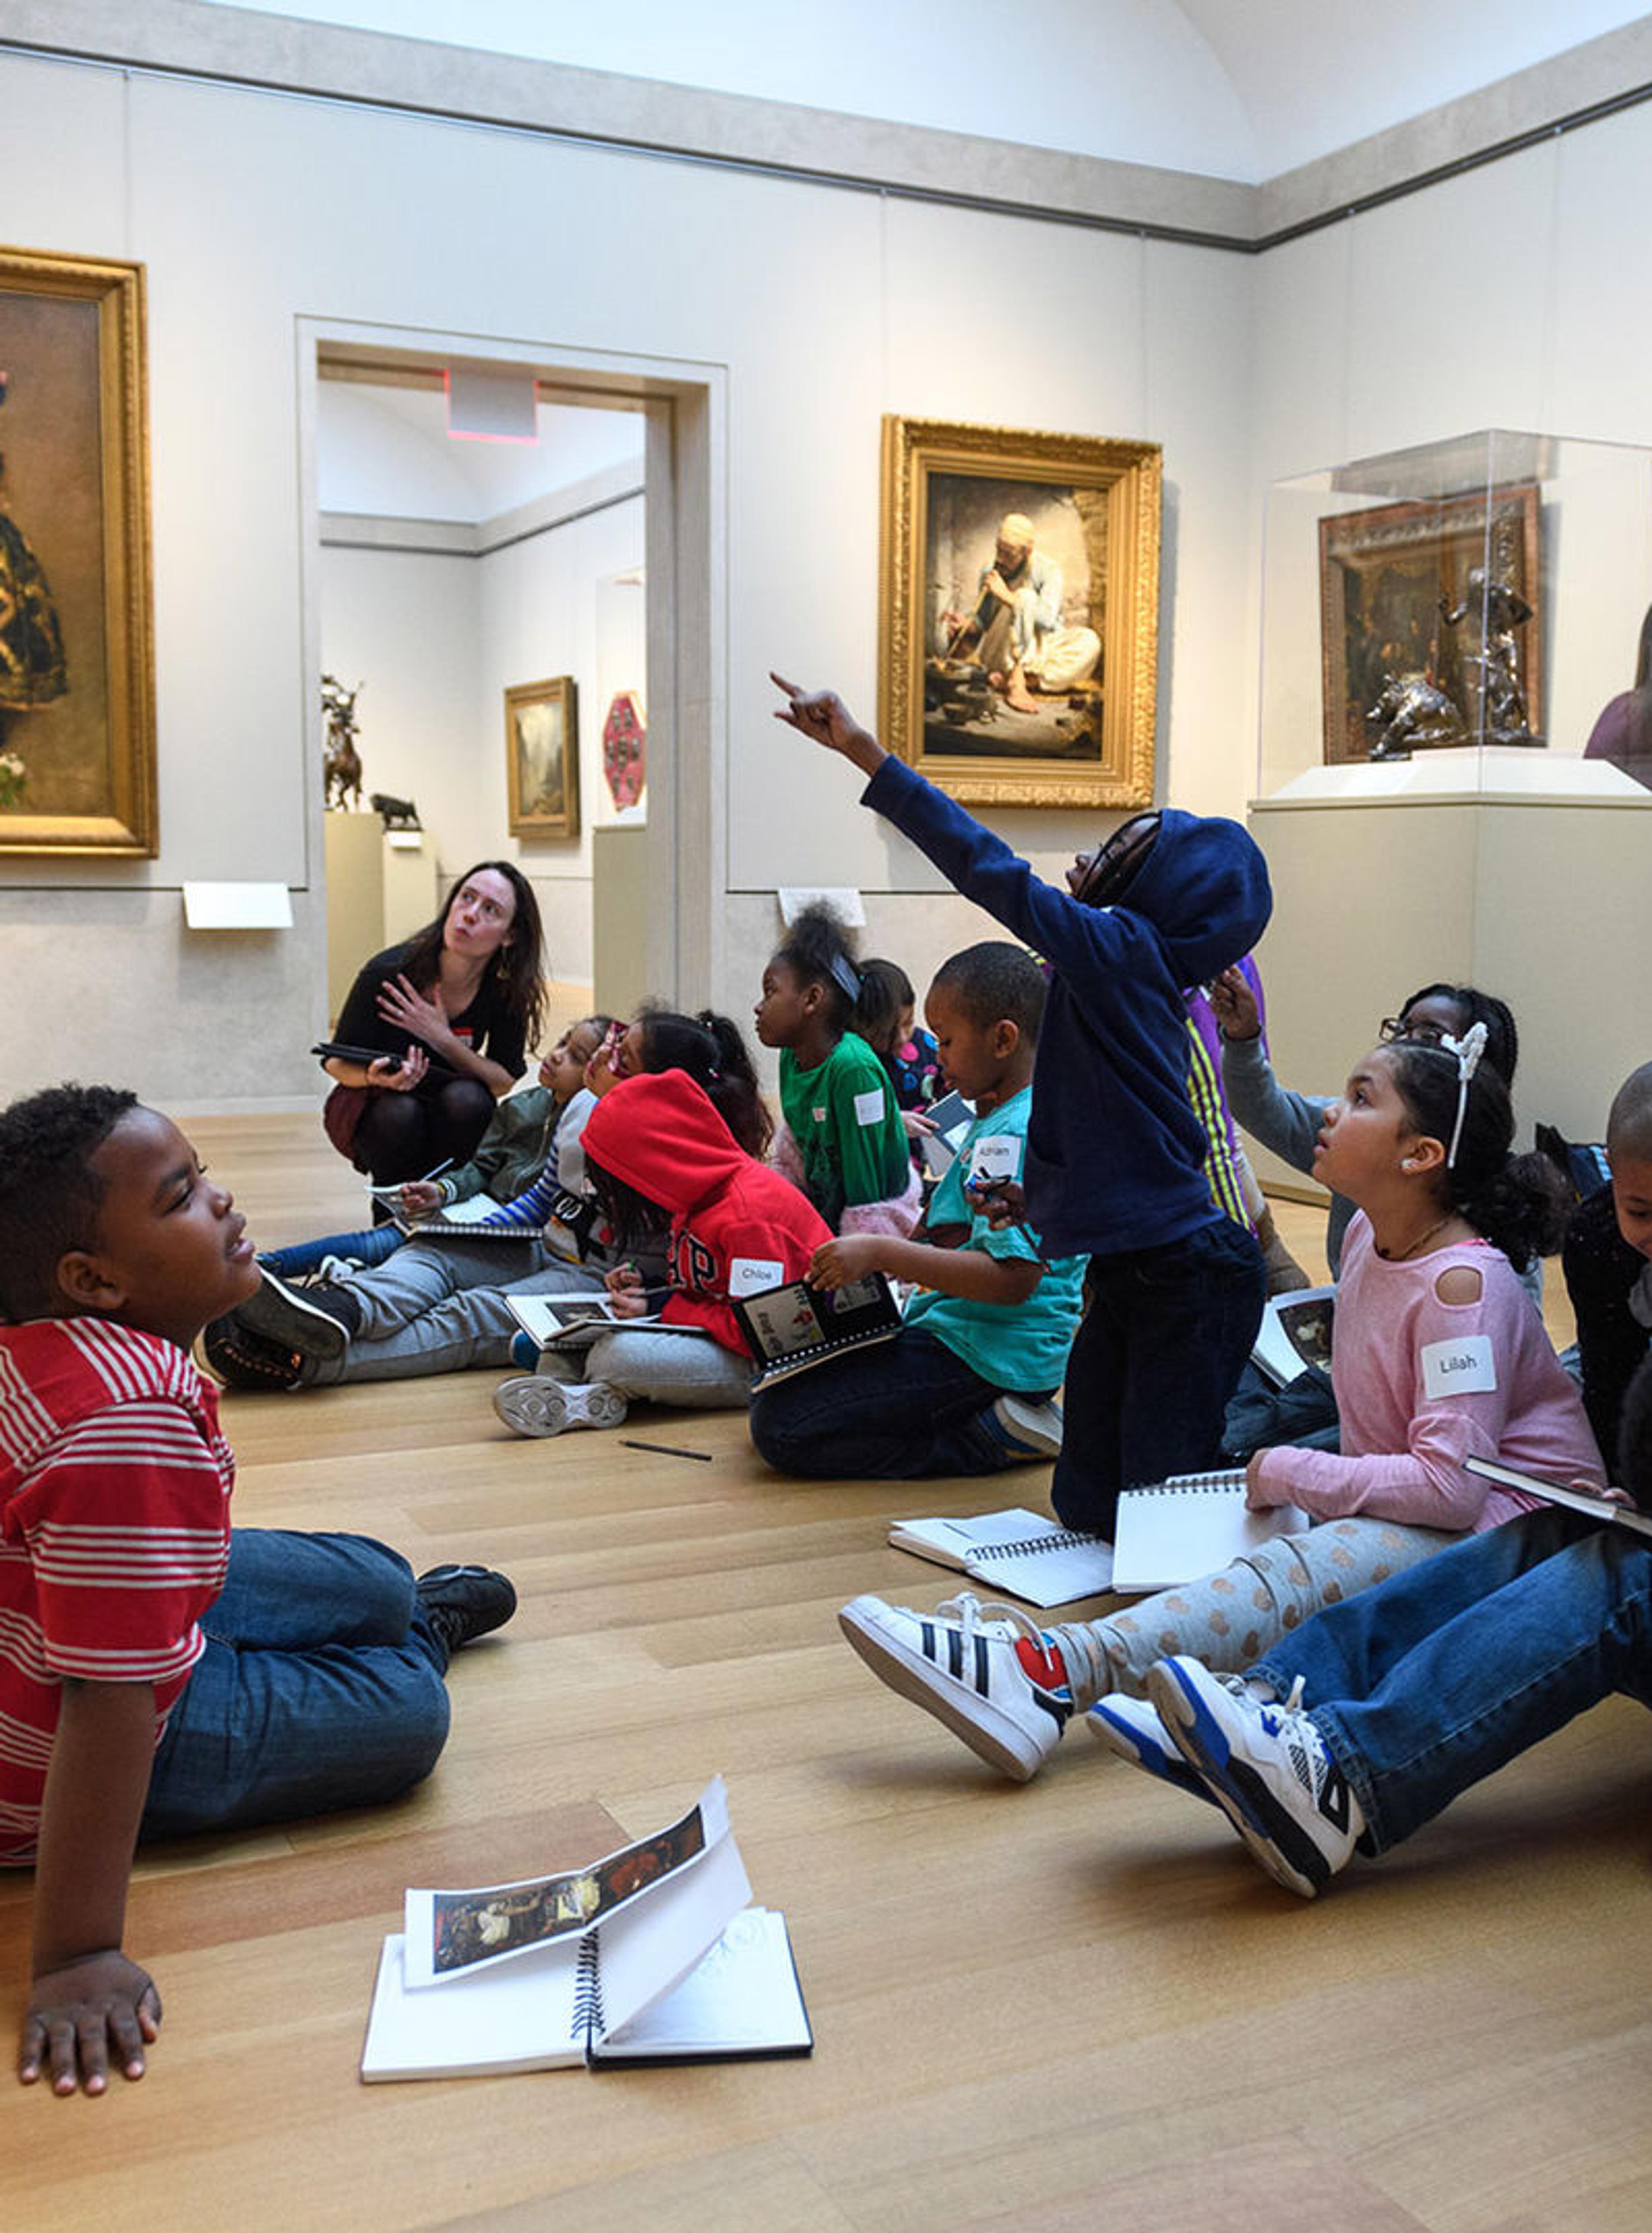 A group of children sitting on the floor and pointing to works in The Met's American Wing.